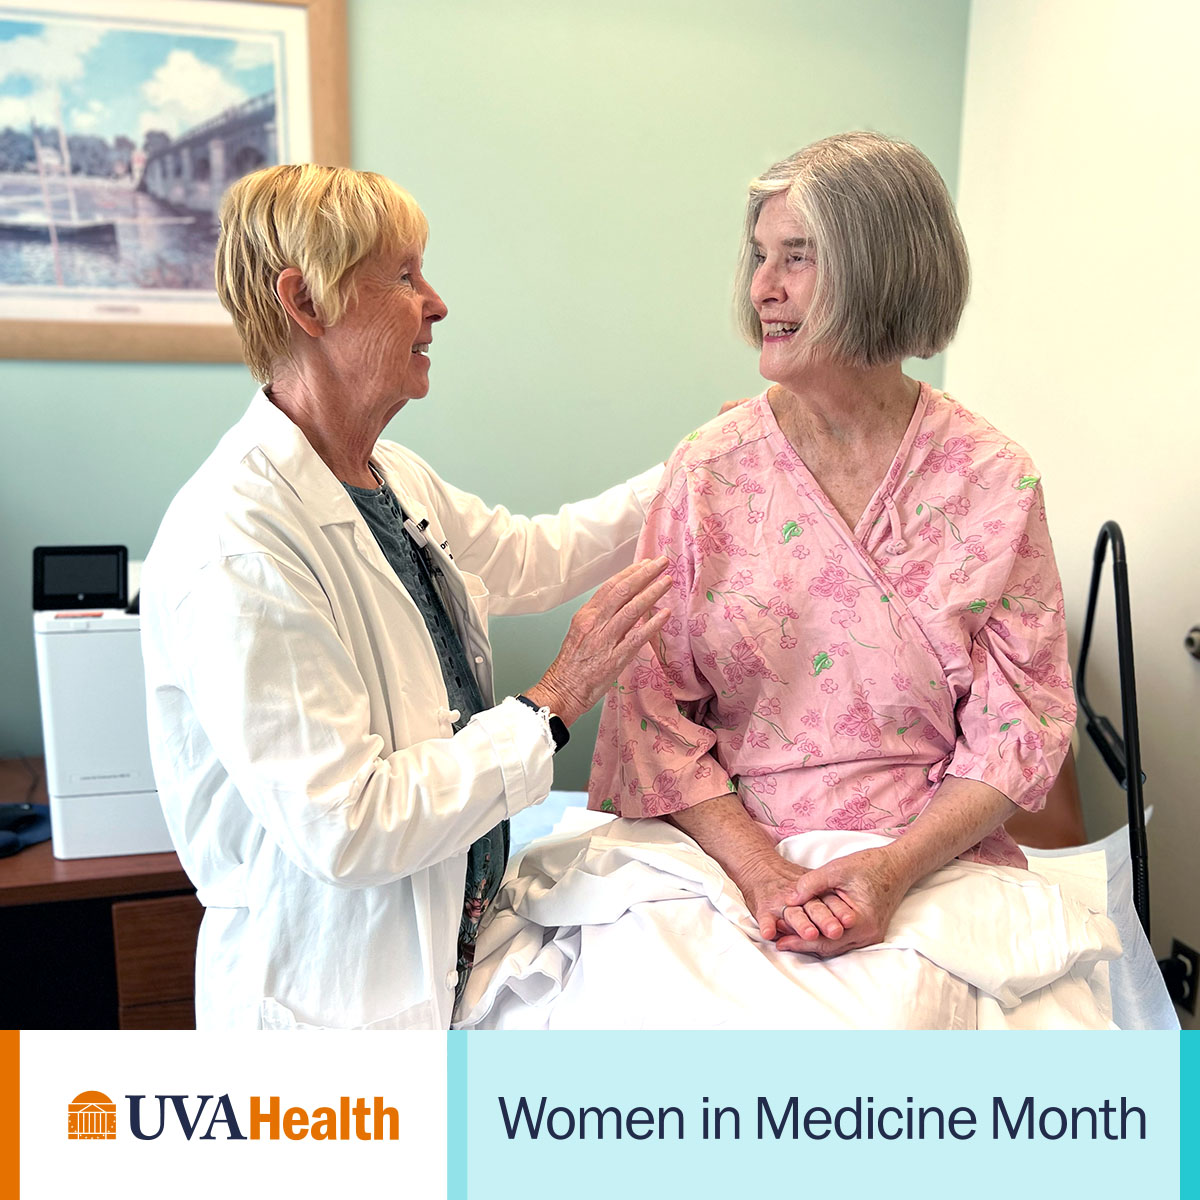 September is #WomenInMedicineMonth. All month, we'll be celebrating the bold thinkers and courageous innovators at UVA Health. Meet JoAnn Pinkerton, MD, who inspires hope for her patients and women all over the world suffering from #menopause symptoms. #UVAHealth